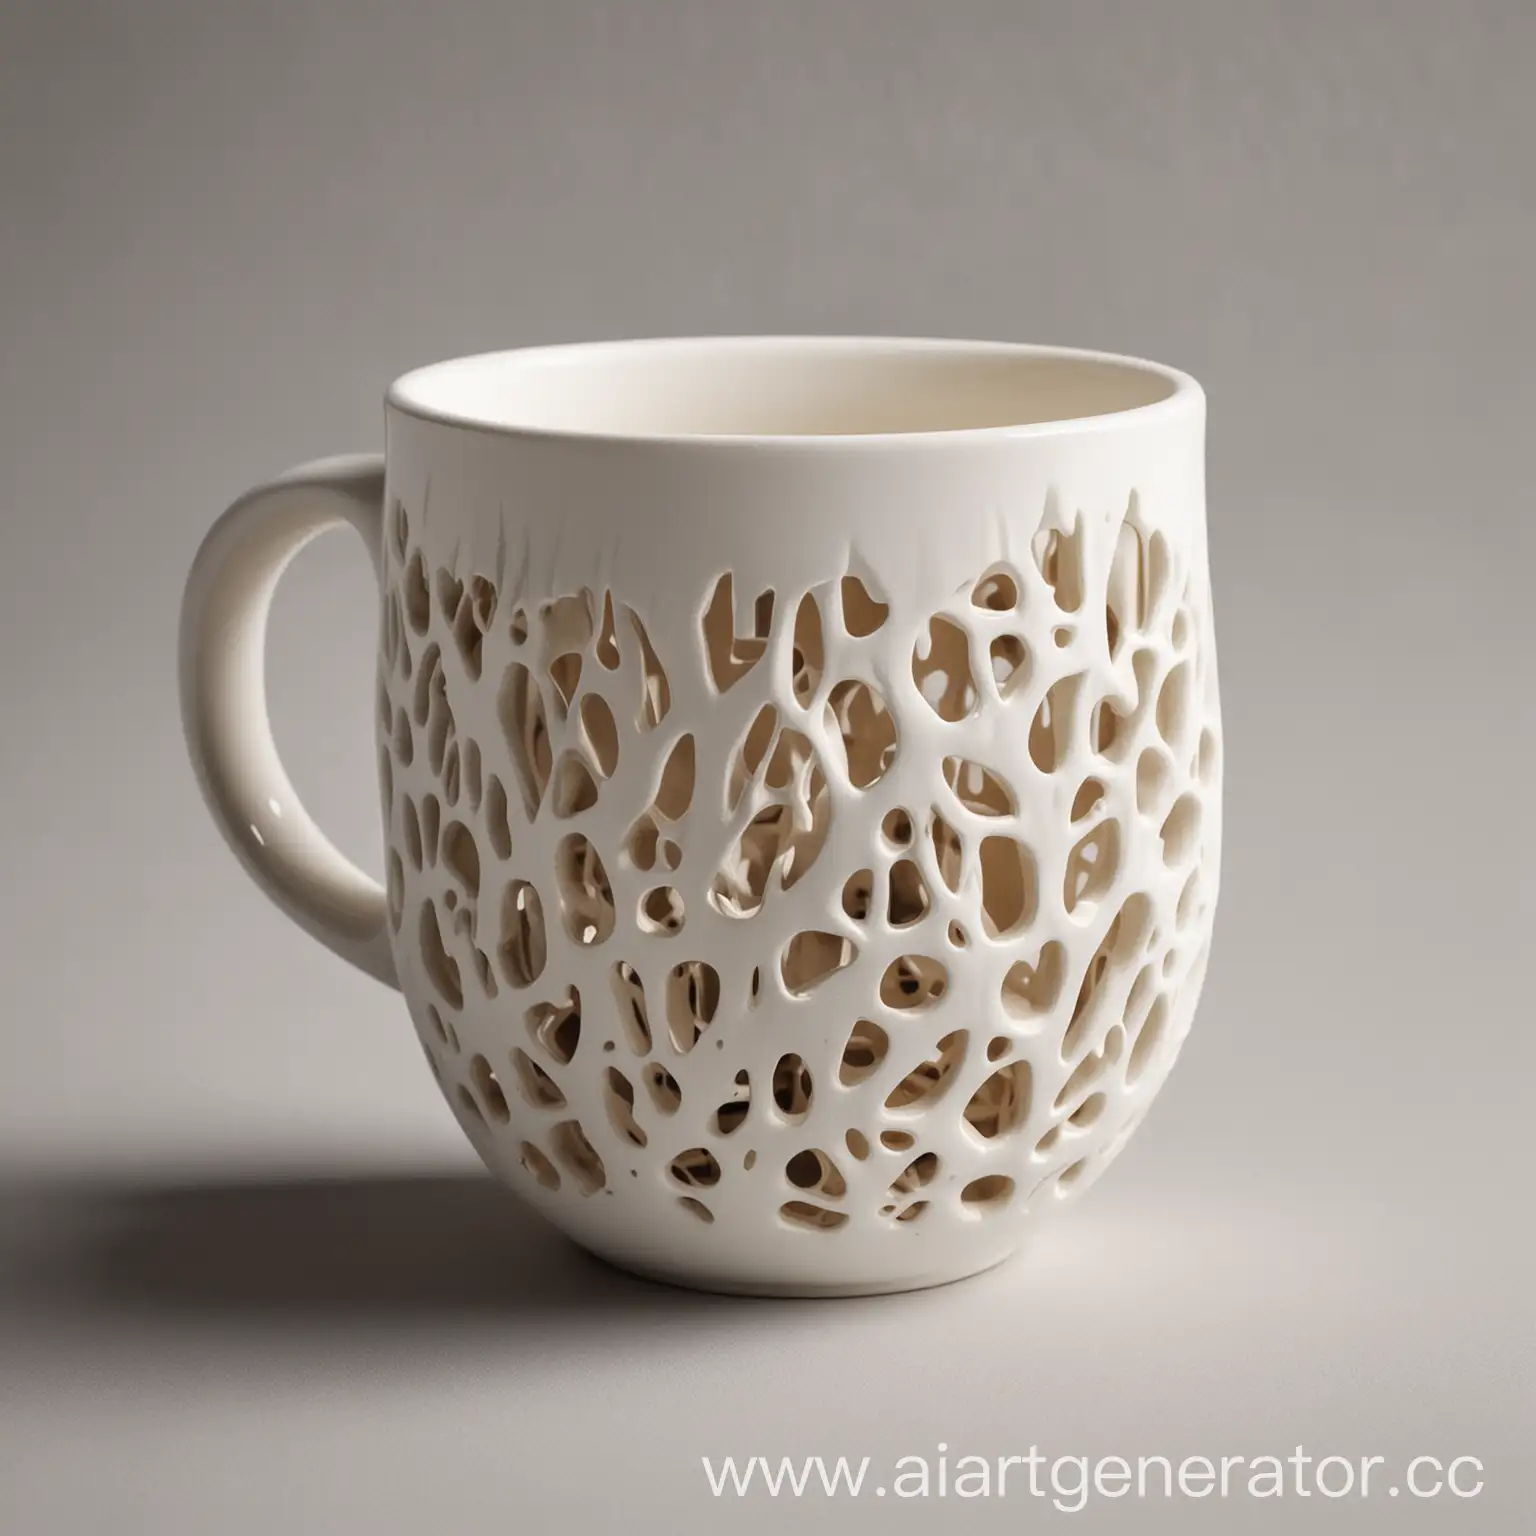 A cup, hollowed out, designer, white